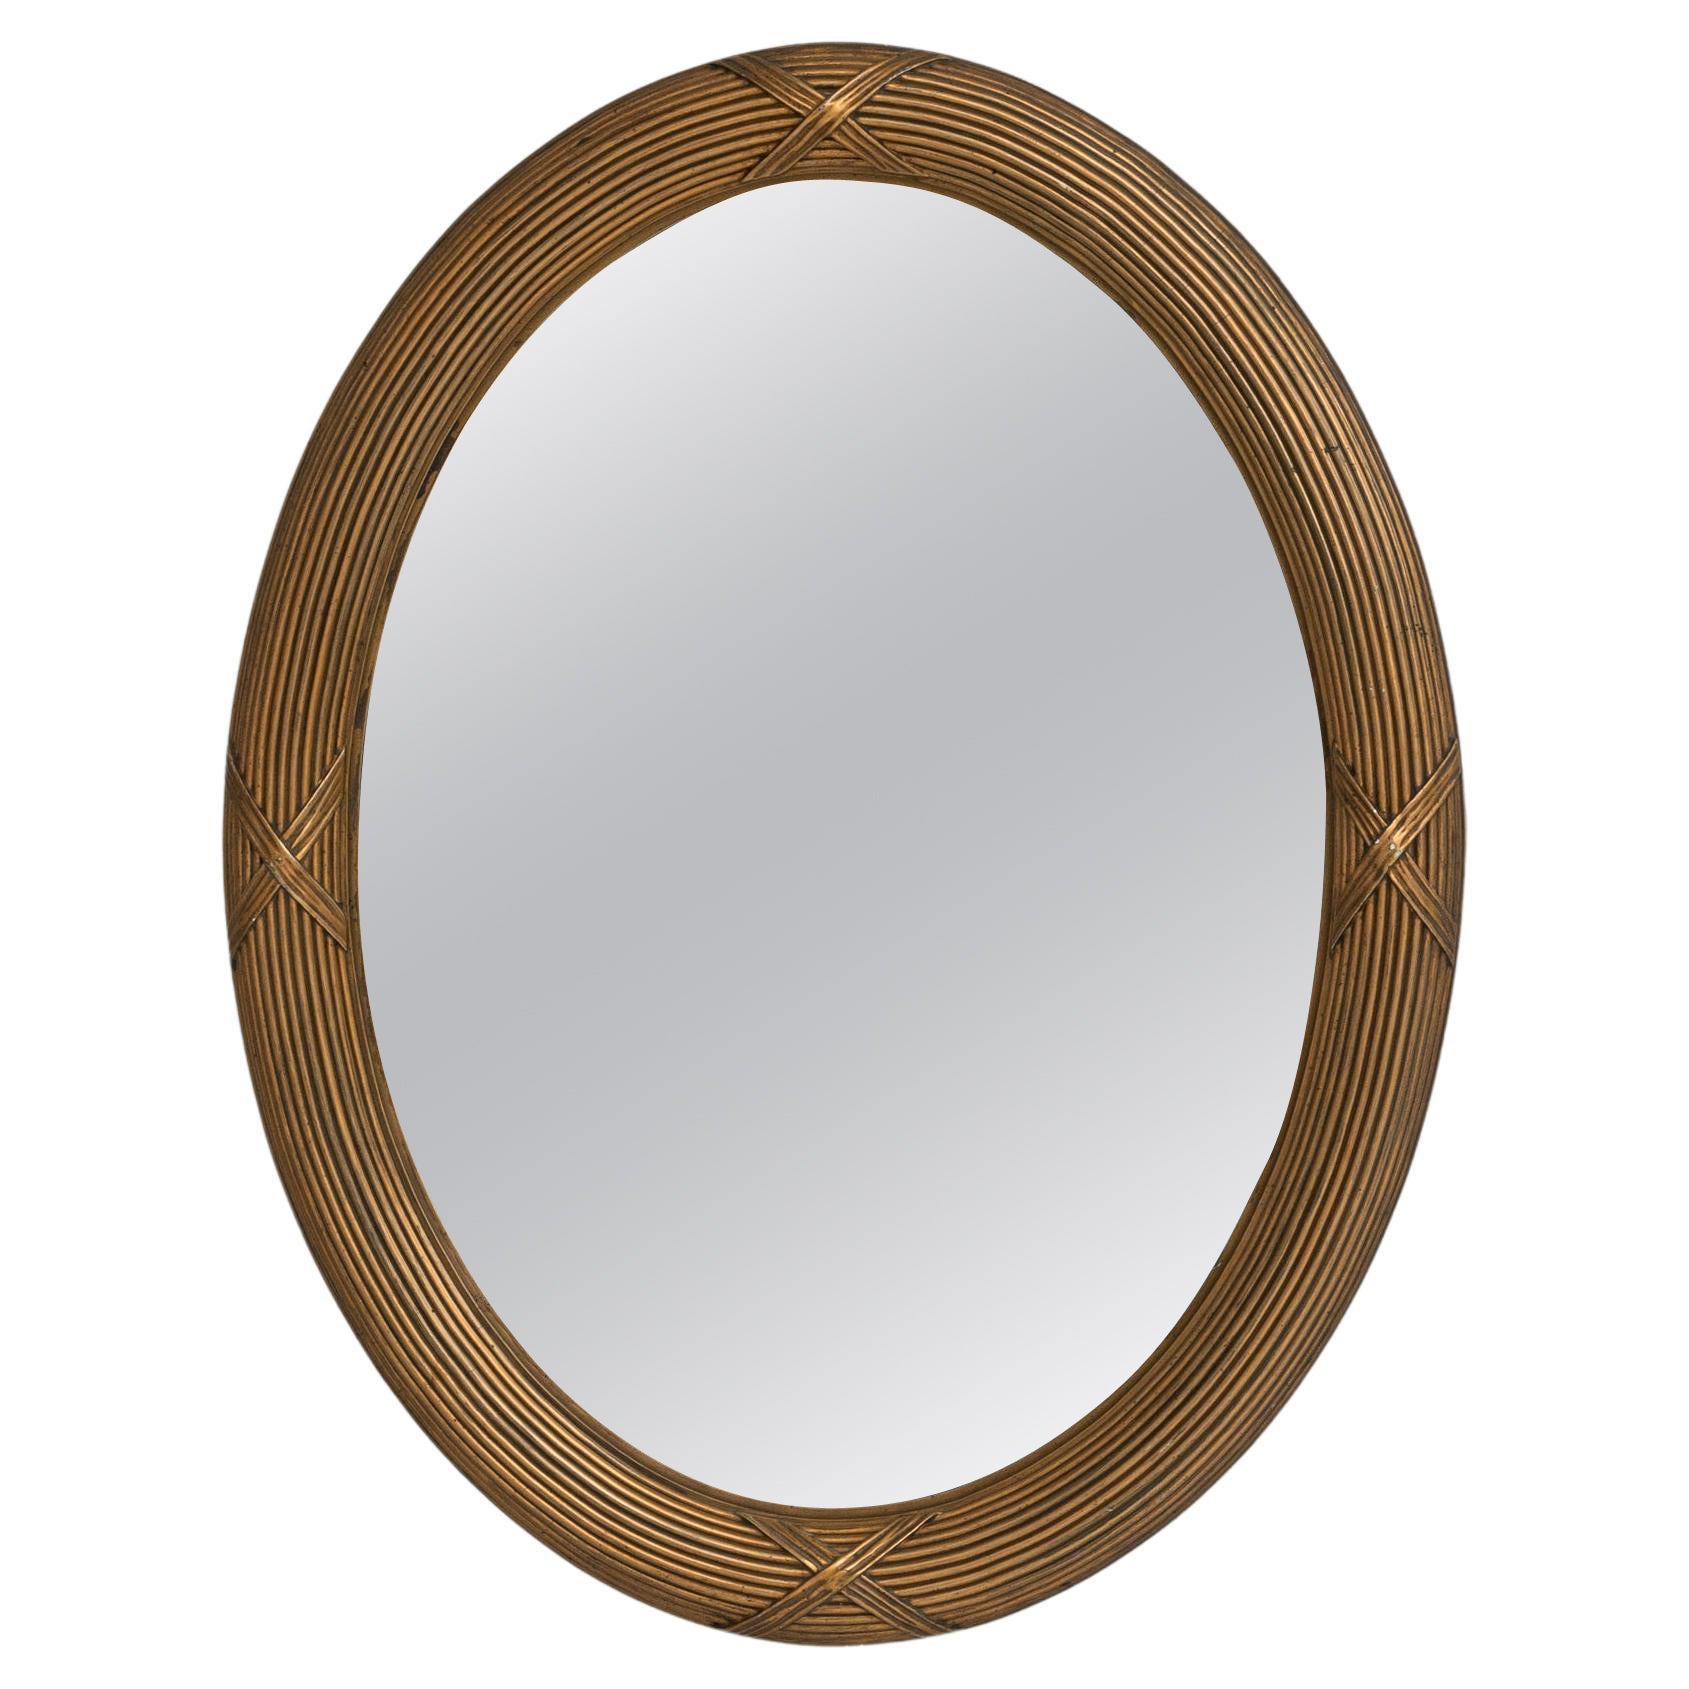 Early 20th Century French Wooden Mirror